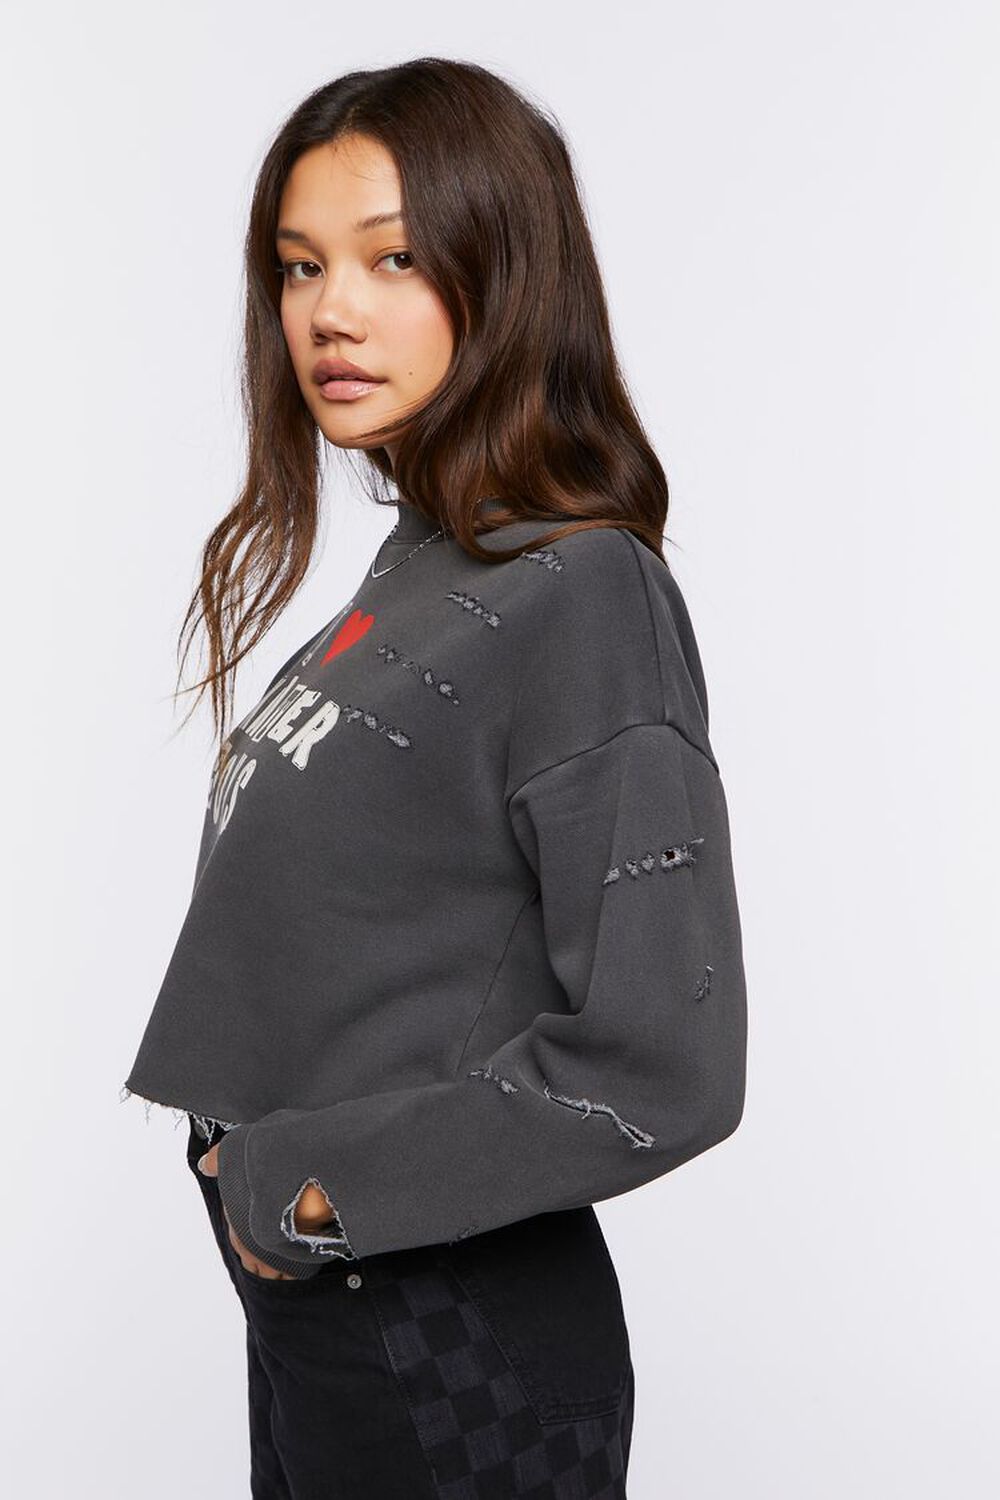 CHARCOAL/MULTI Skater Boys Graphic Cropped Pullover, image 2